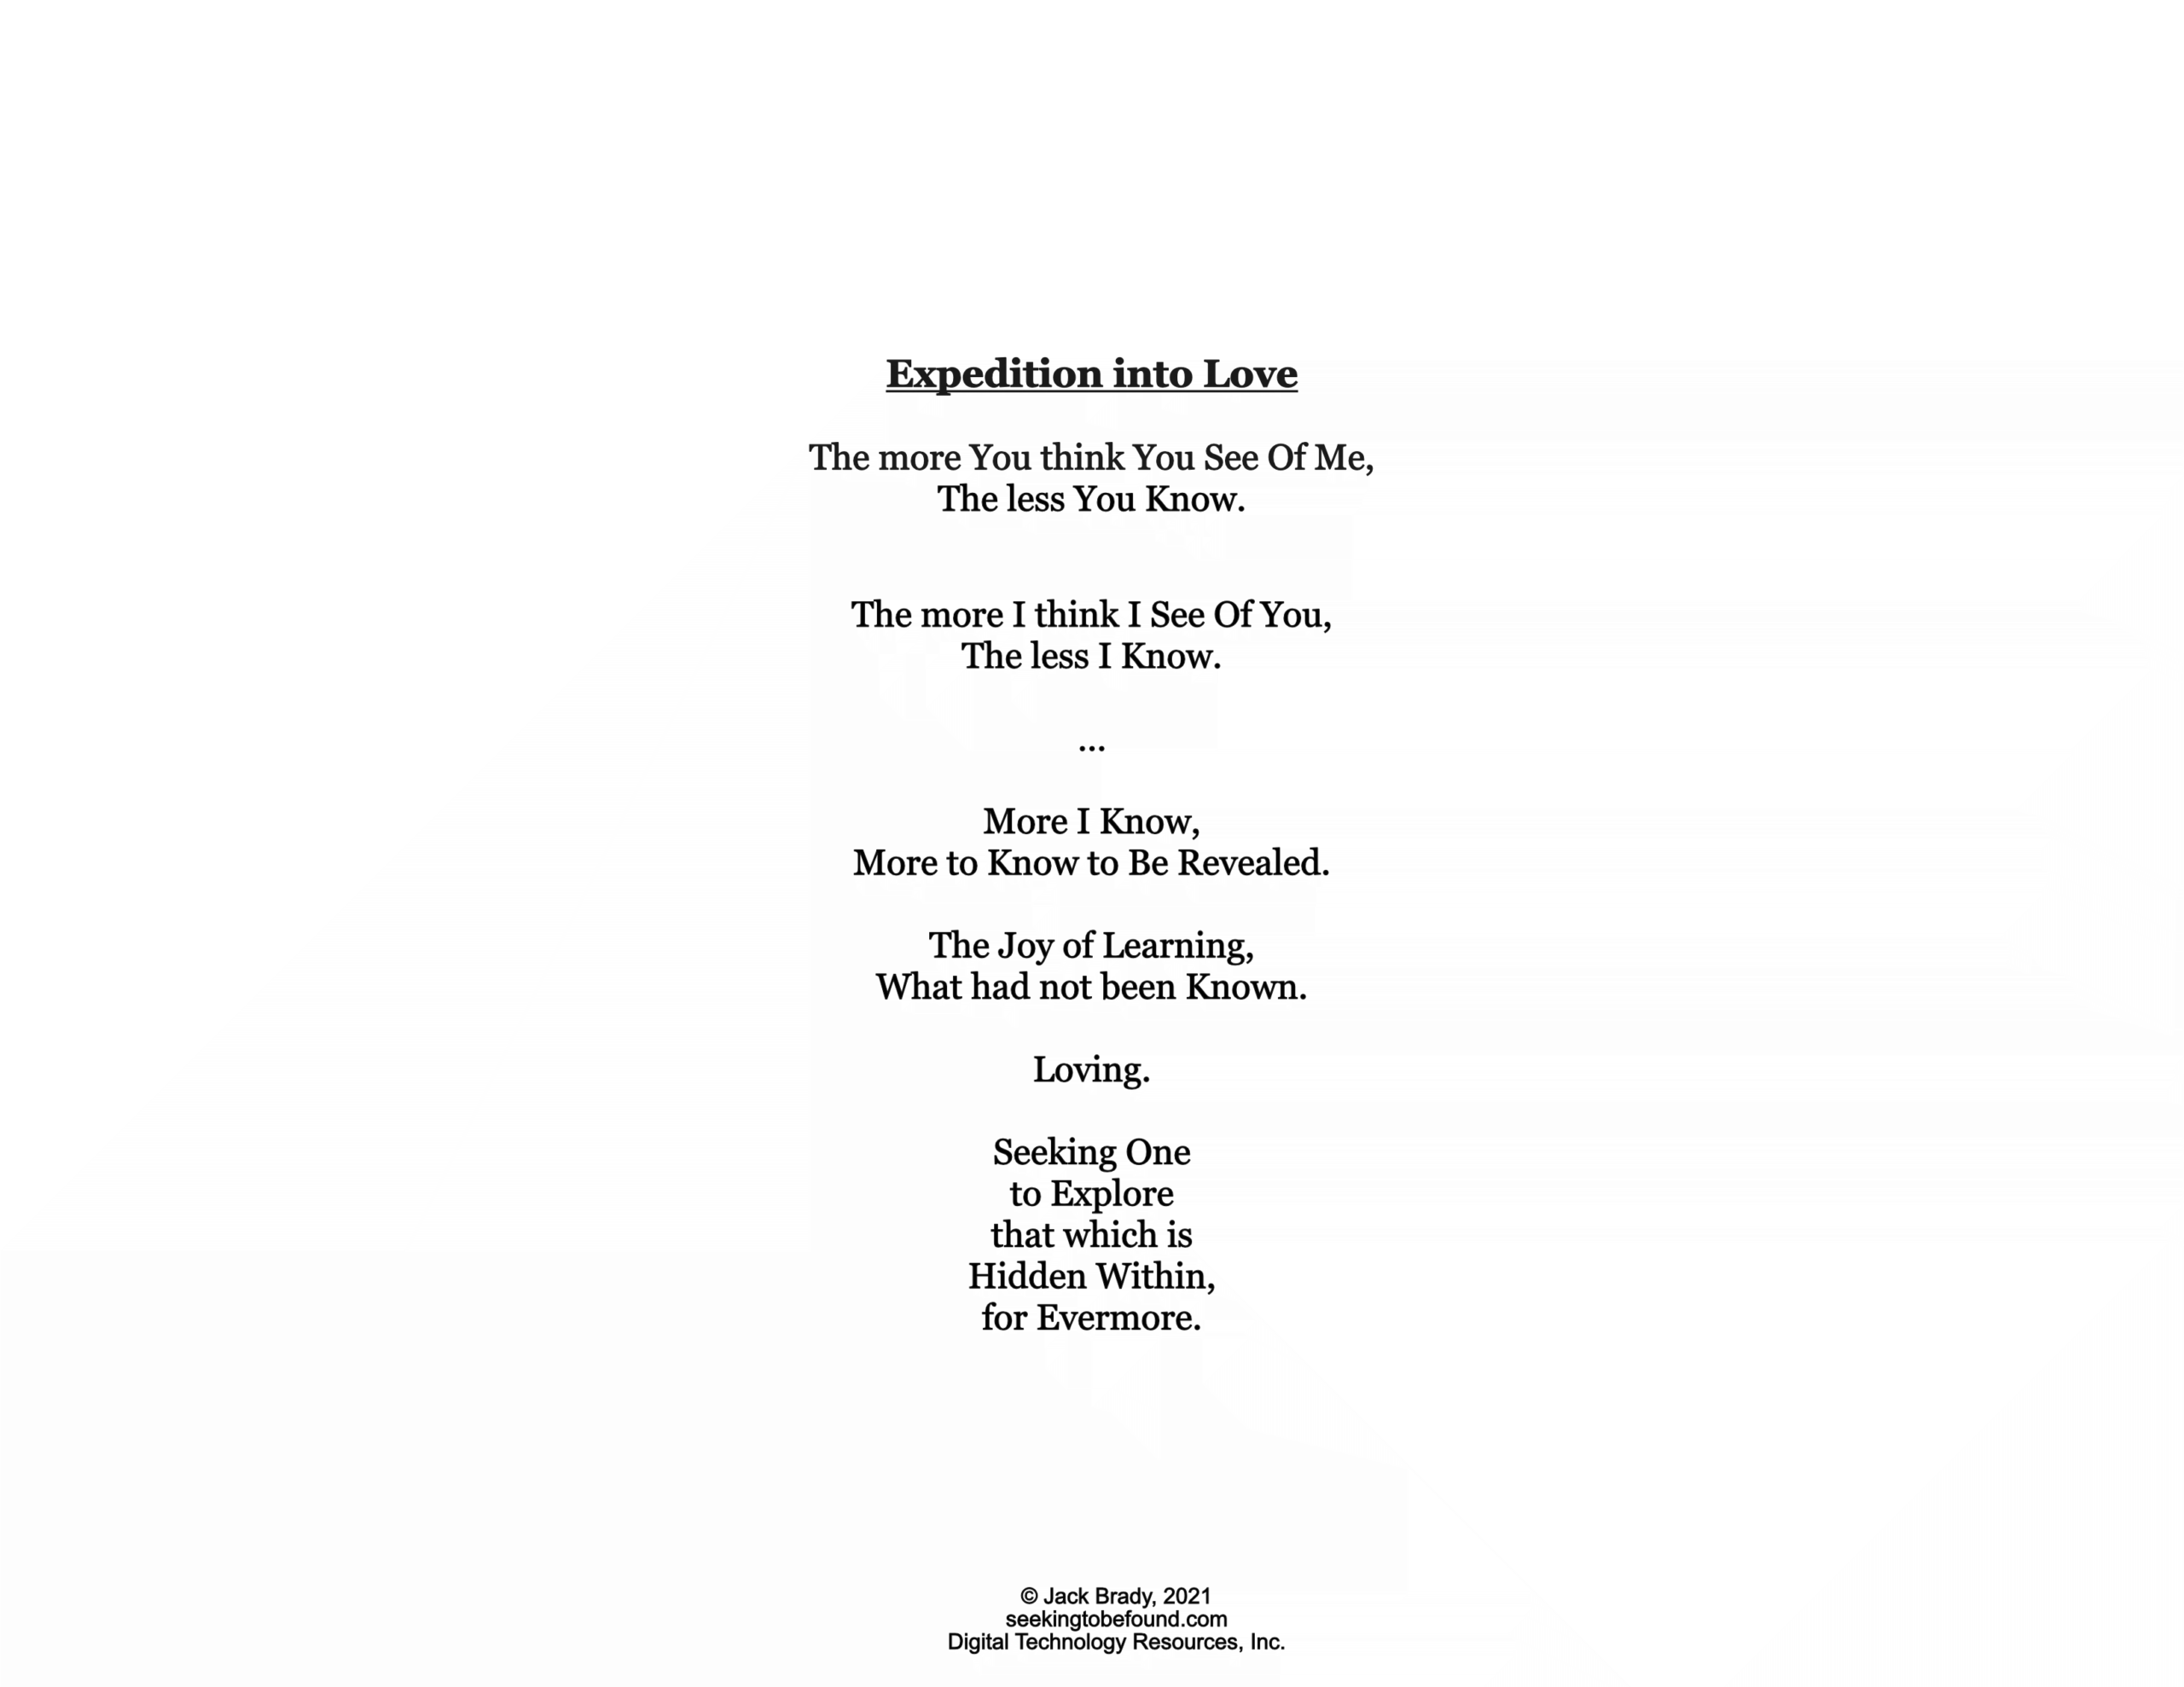 PO-Expedition Into Love, © Digital Technology Resources Inc